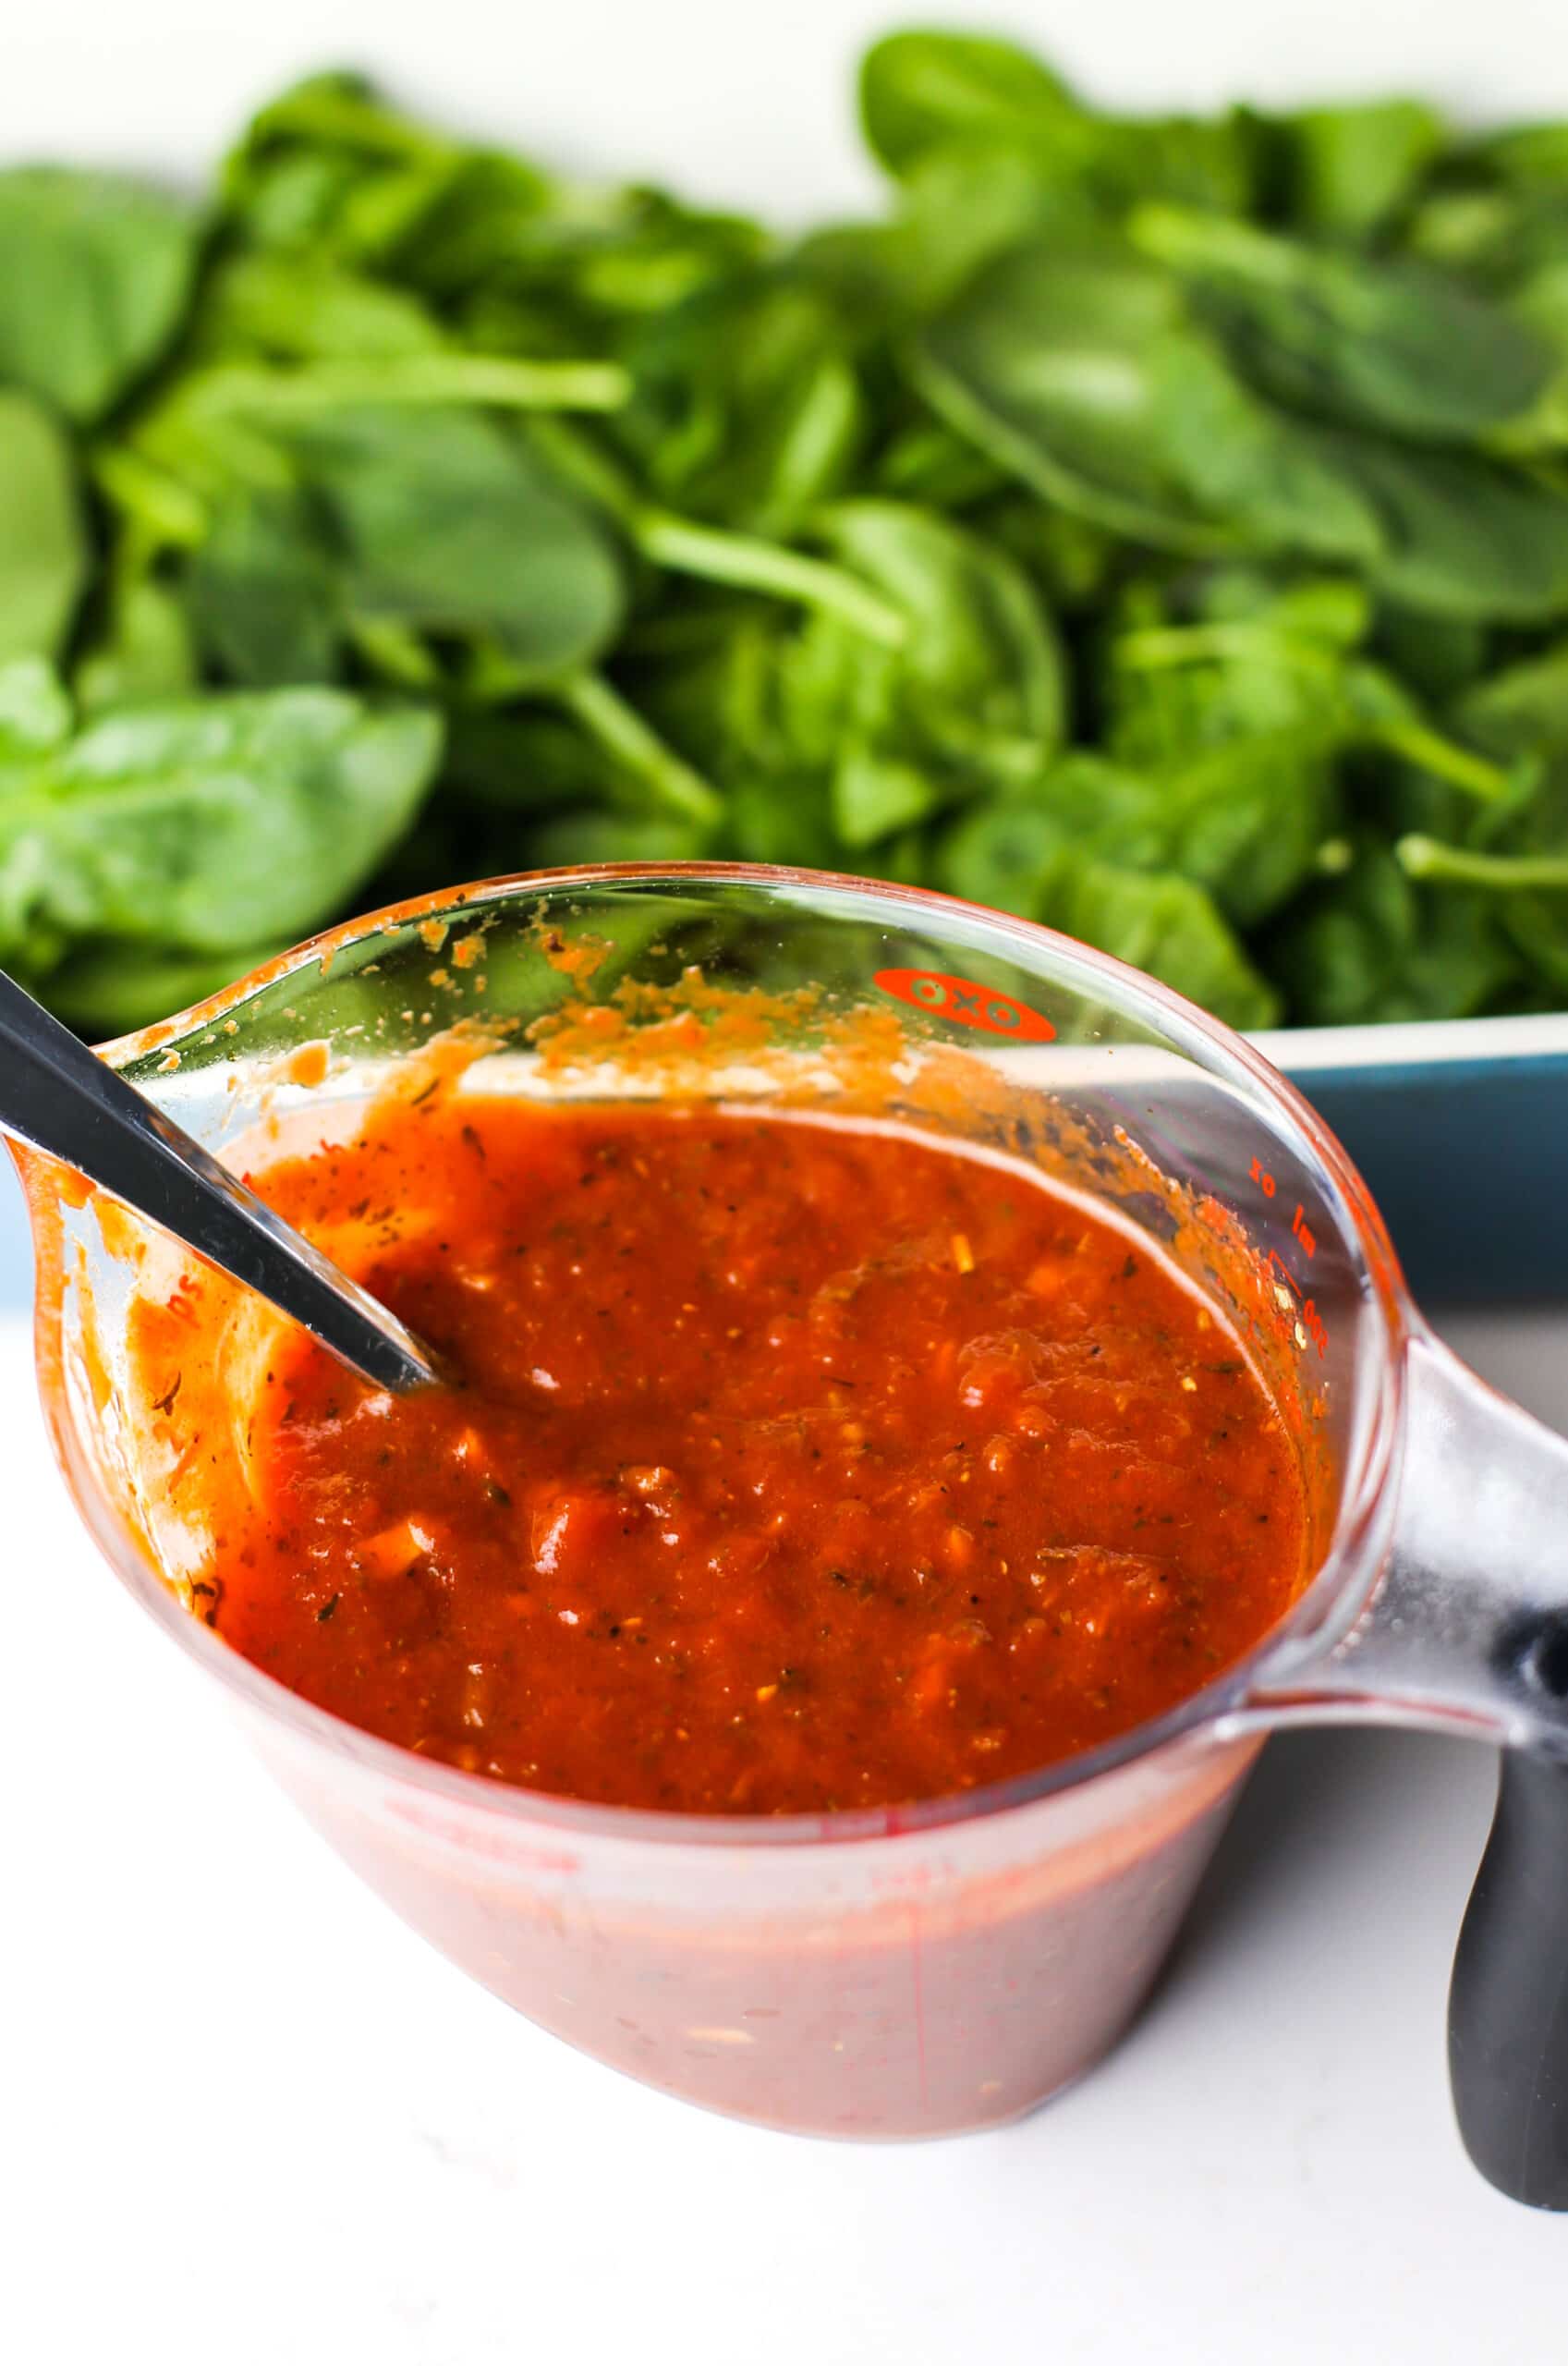 A measuring cup containing marinara sauce and a fork along with a casserole dish full of baby spinach.